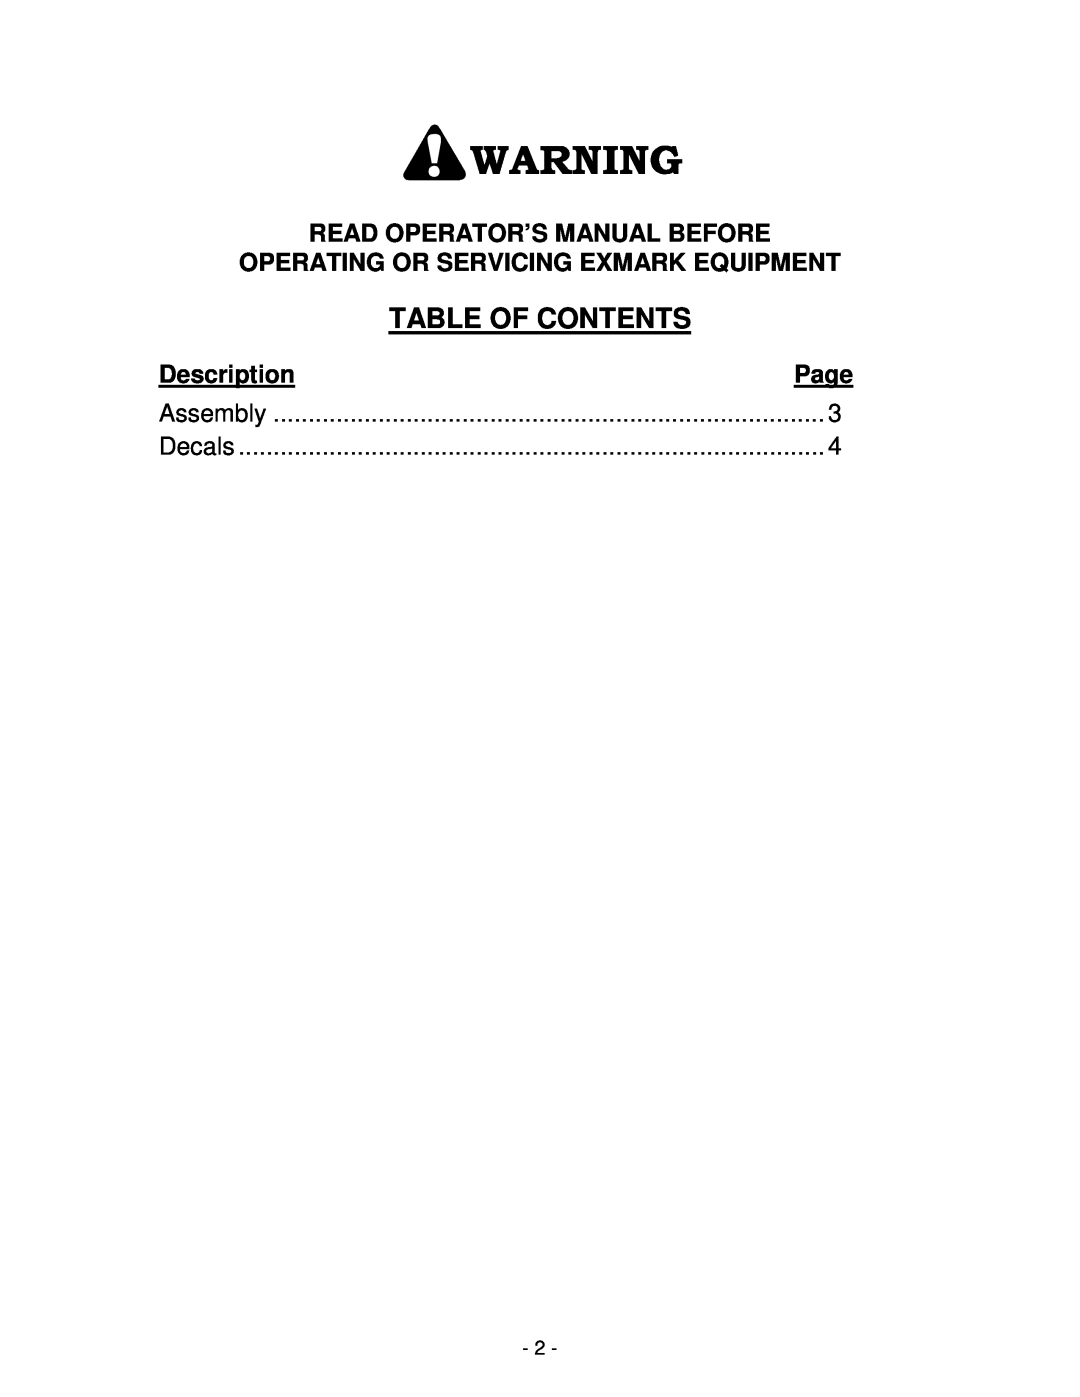 Exmark OCDWB01 Read Operator’S Manual Before, Operating Or Servicing Exmark Equipment, Description, Page, Assembly, Decals 